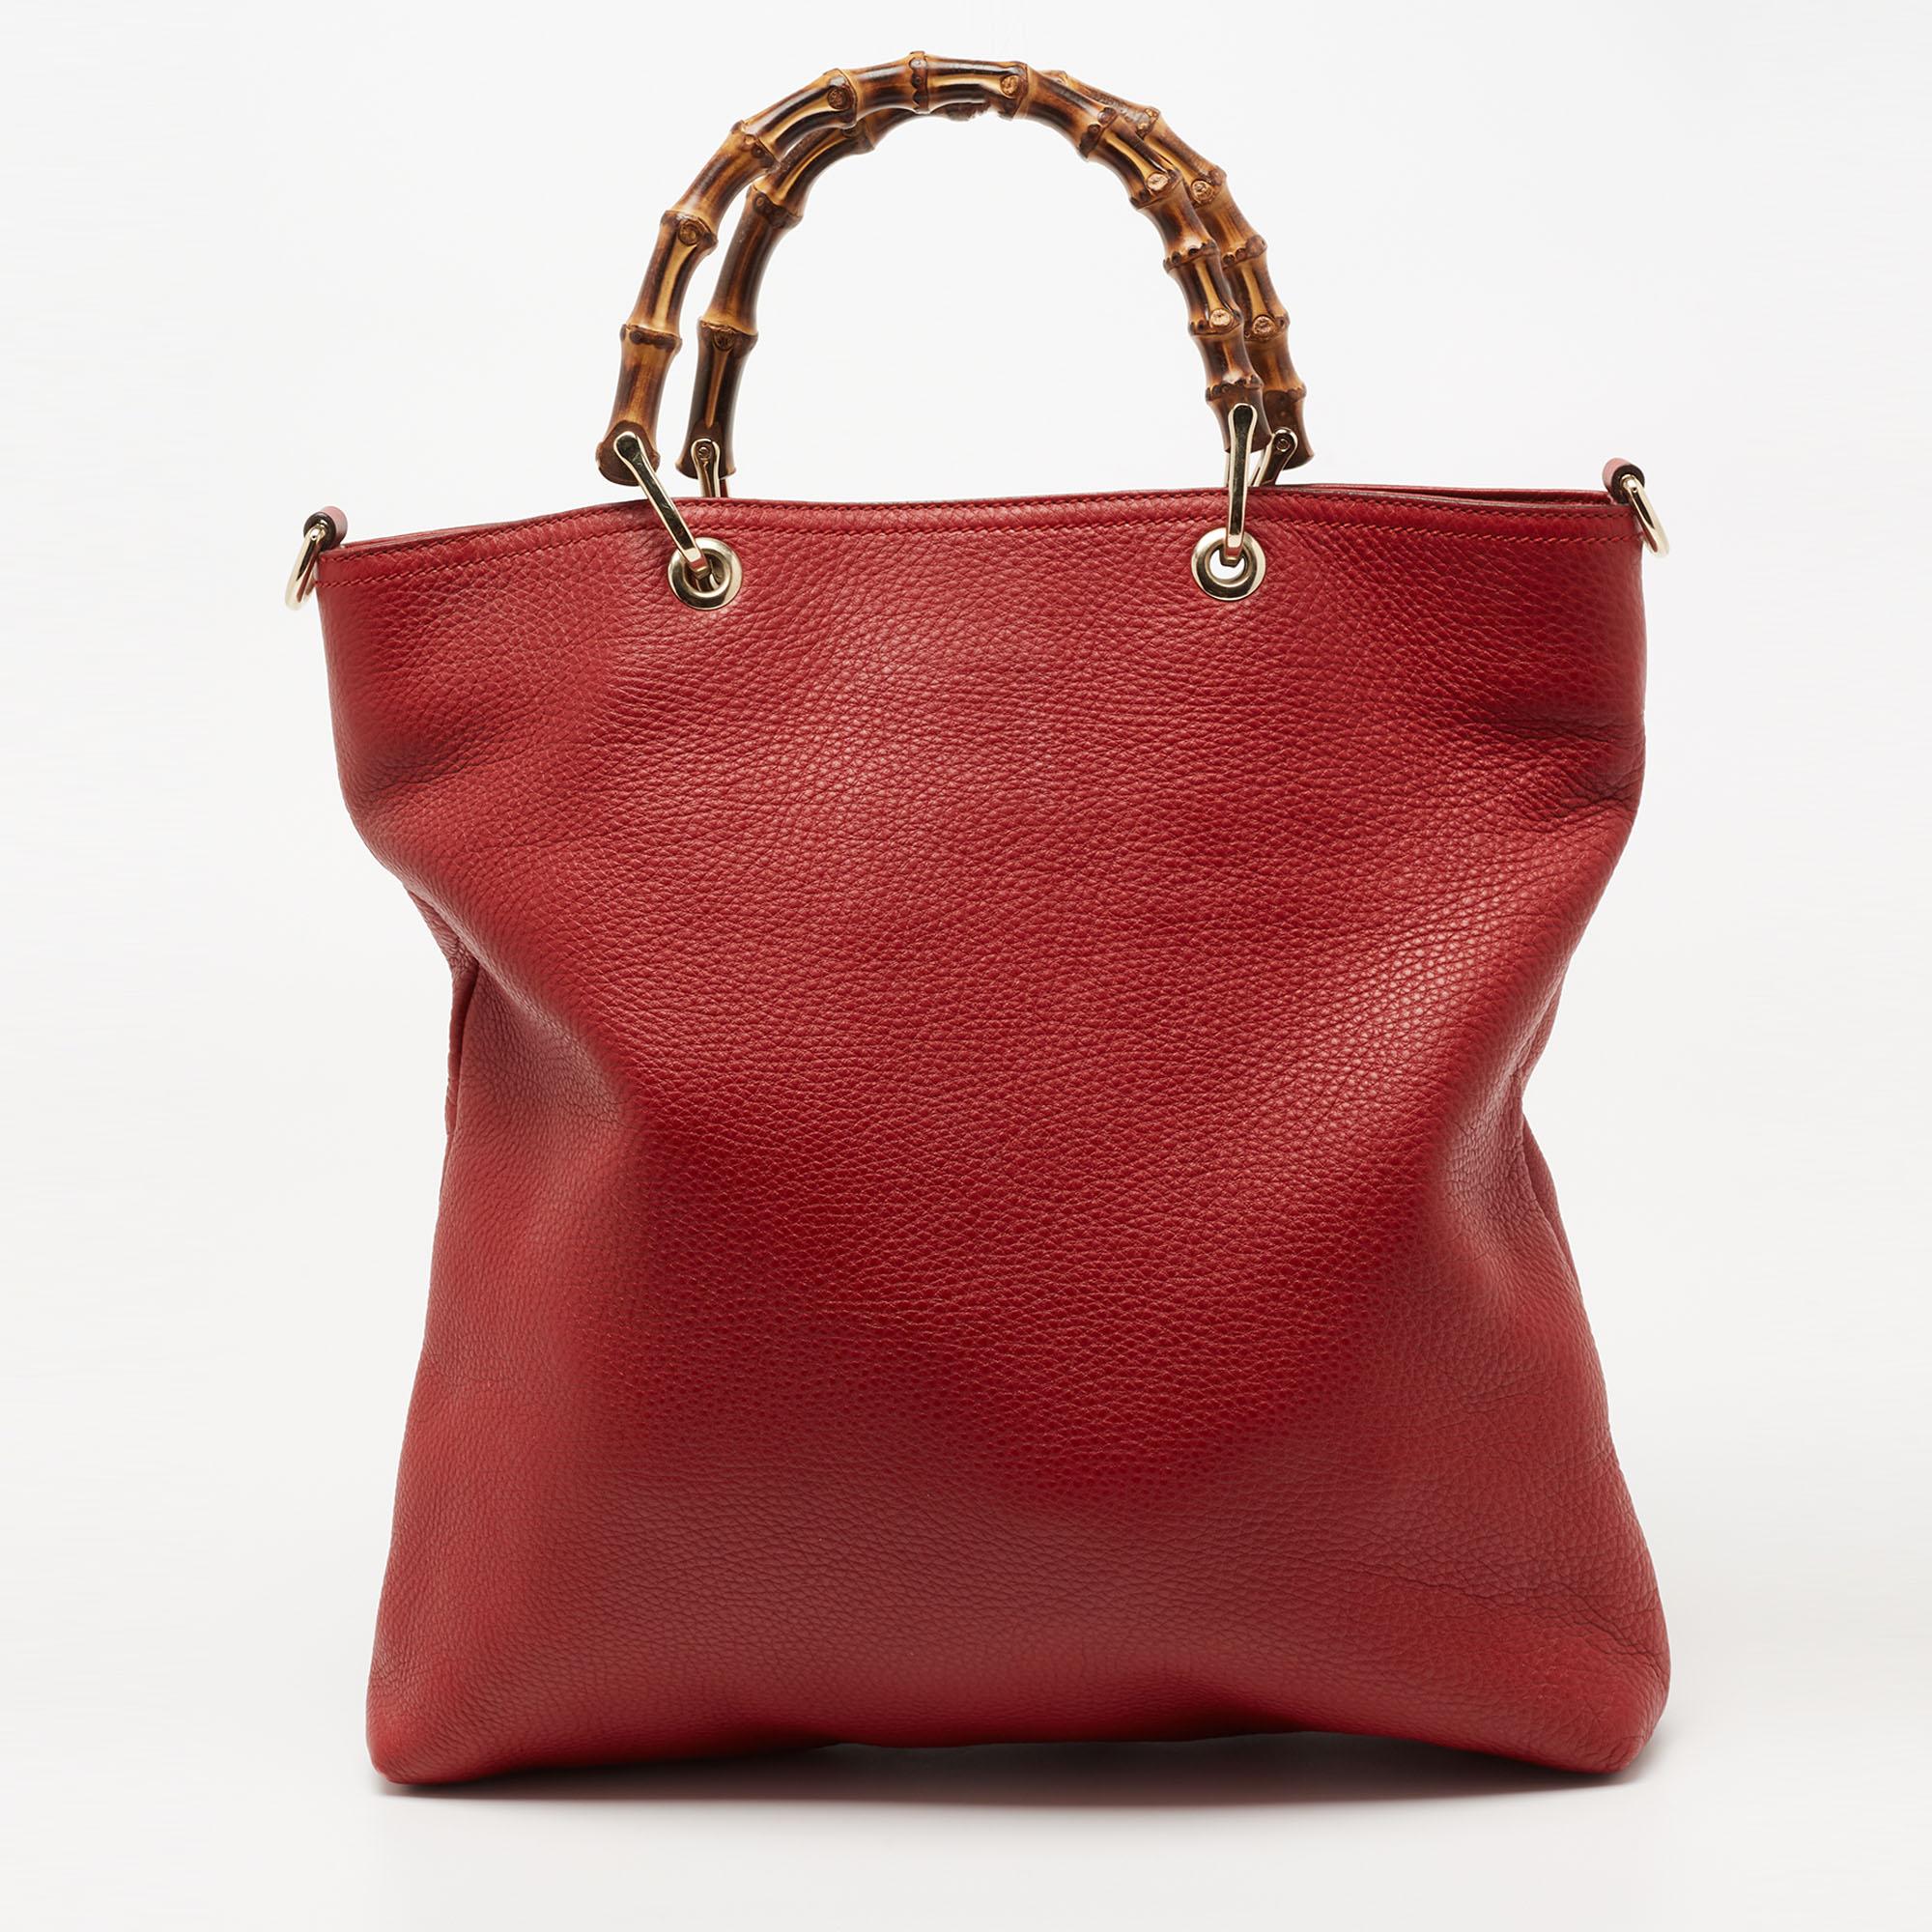 One of the most stunning creations from the House of Gucci is this tote. It is made from red leather on the exterior. It features a canvas-lined interior and gold-tone hardware. The structured silhouette of the tote is supported by dual Bamboo